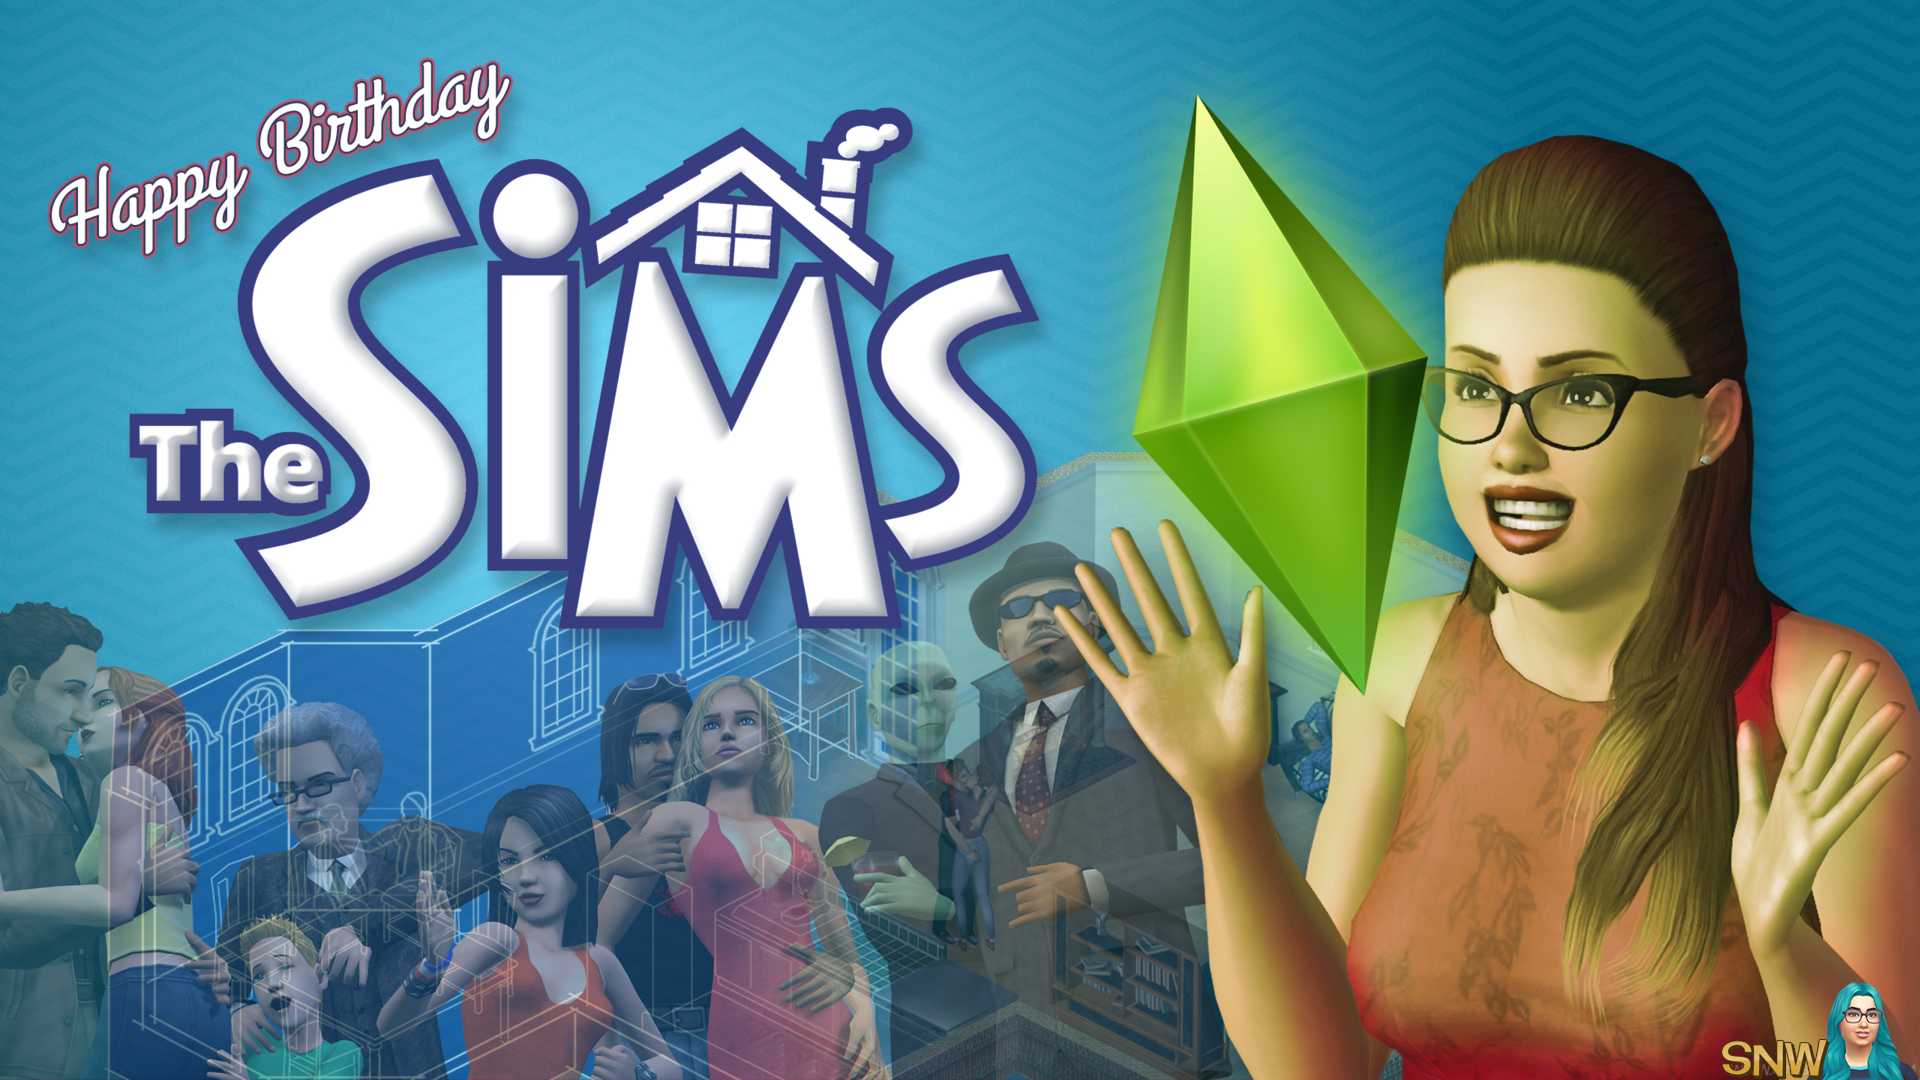 The Sims Anniversary Snw Simswork